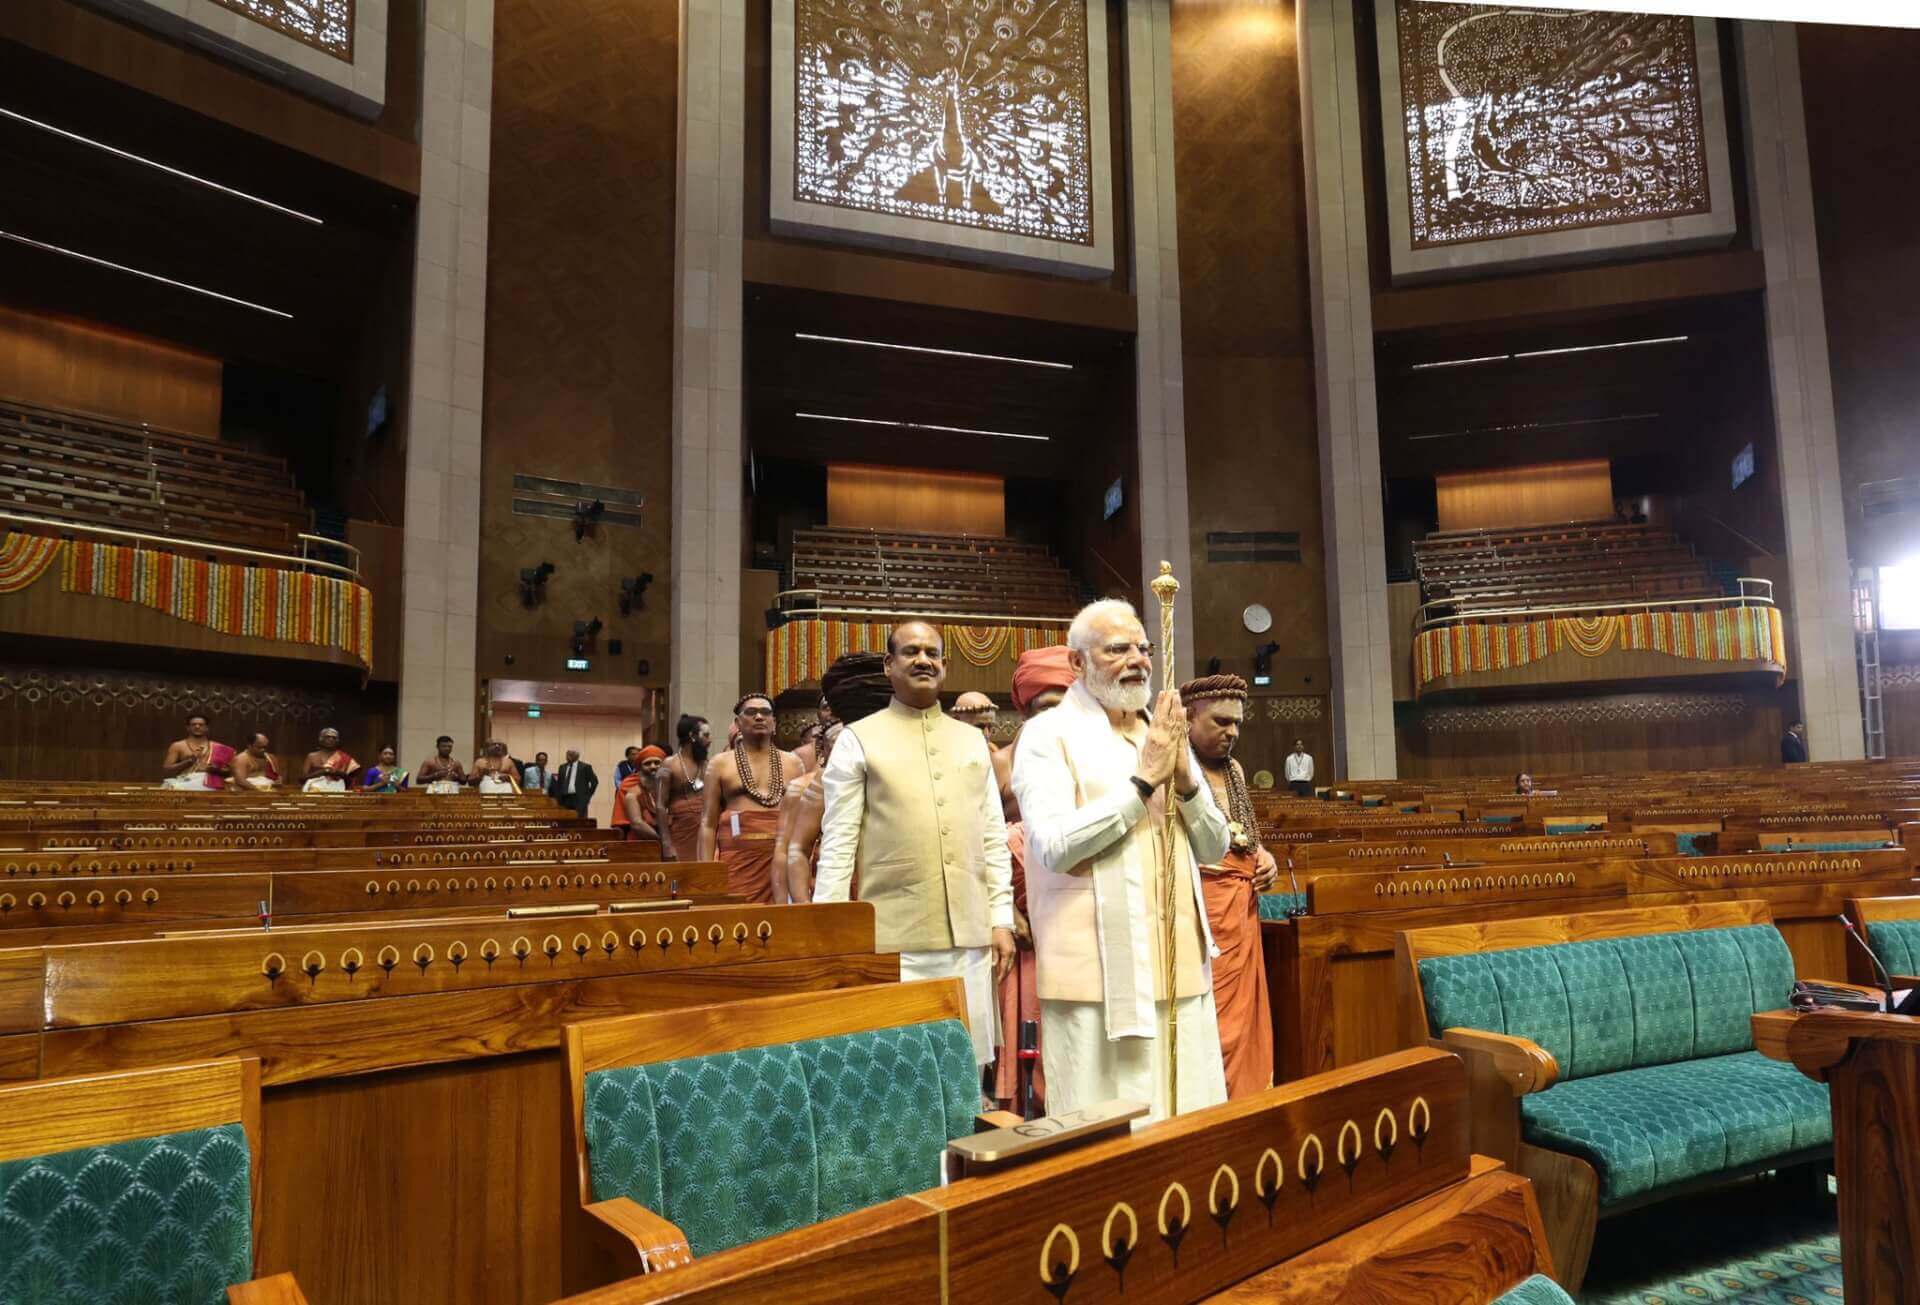 PM Modi Lauds New Parliament Building as Symbol of Indians’ “Aspirations and Dreams”